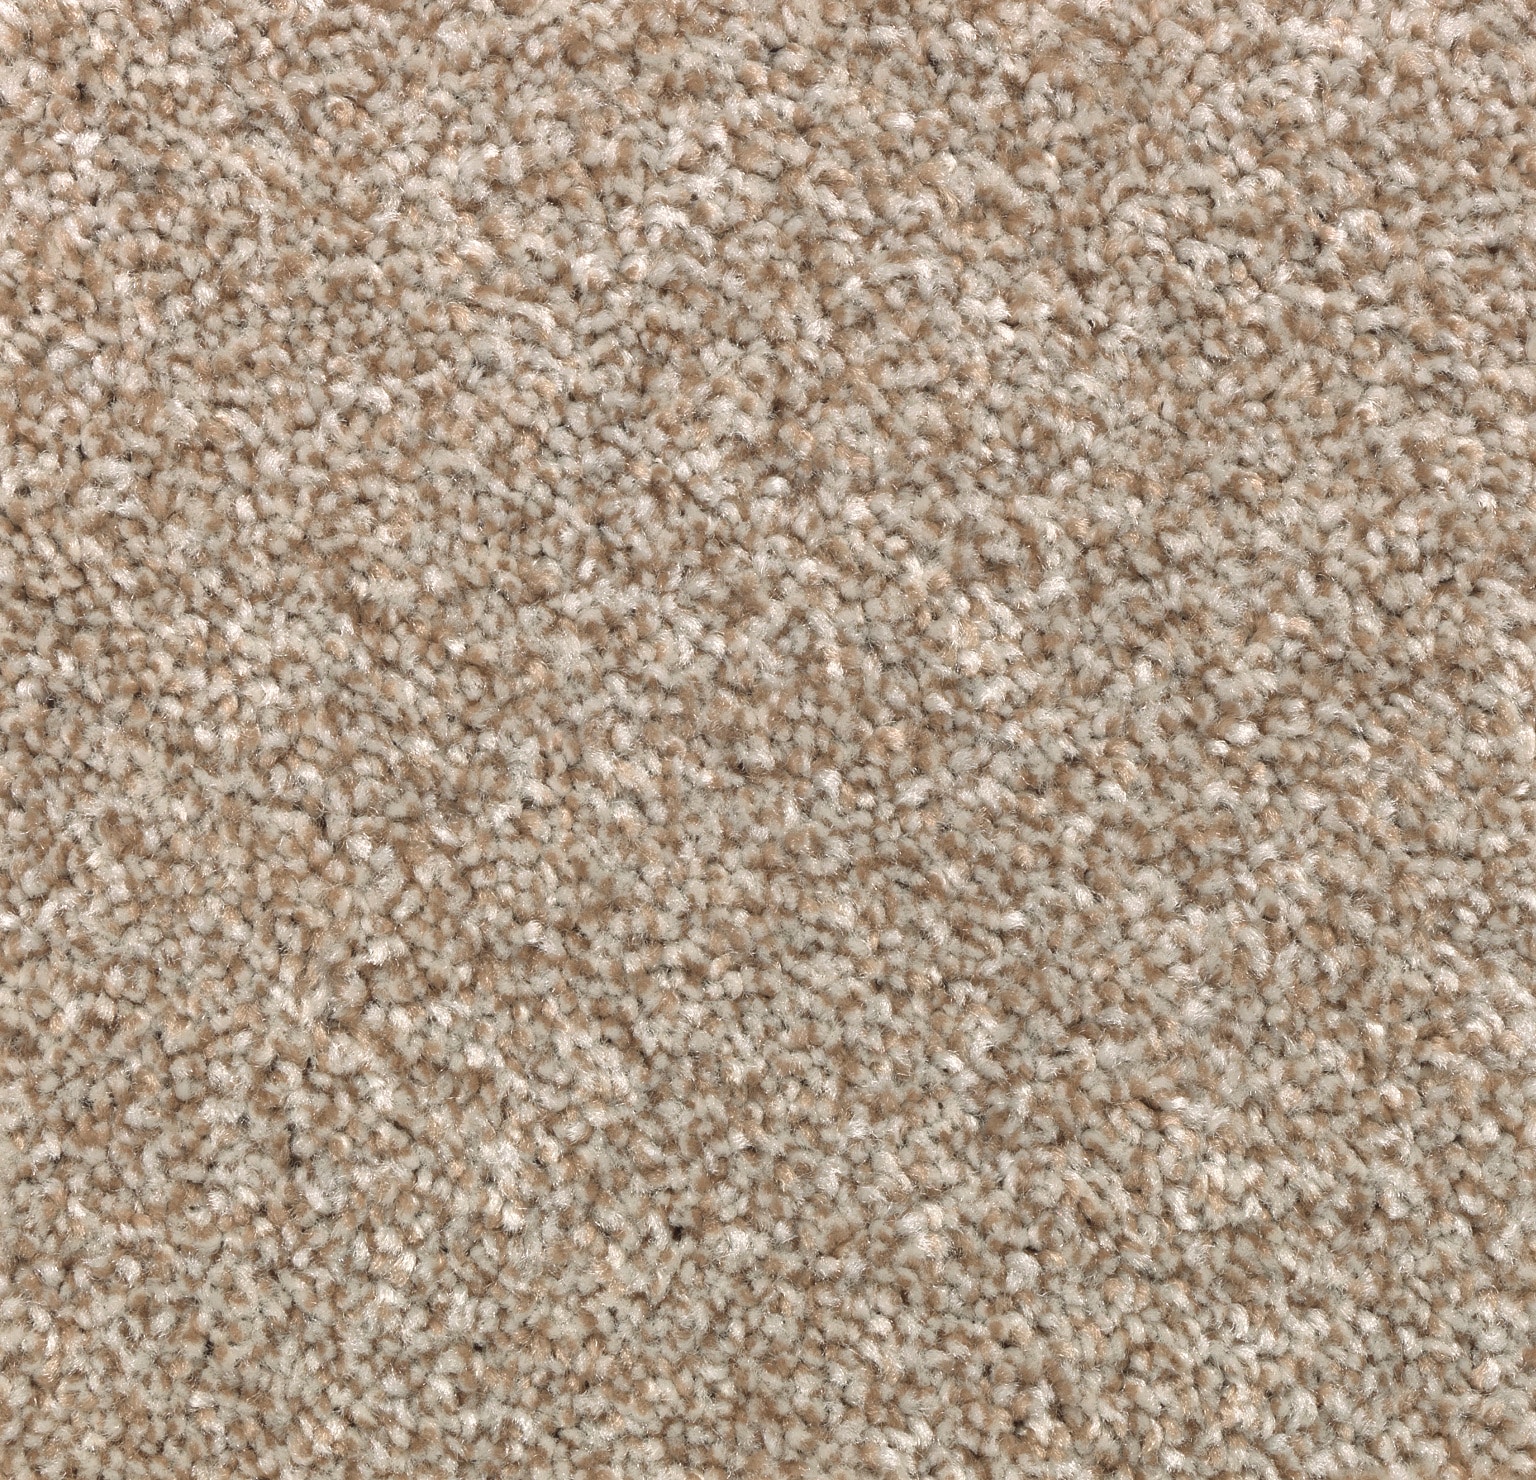 STAINMASTER (Sample) Durable Step Textured in Carpet at Carrington II Samples the Beige department Carpet